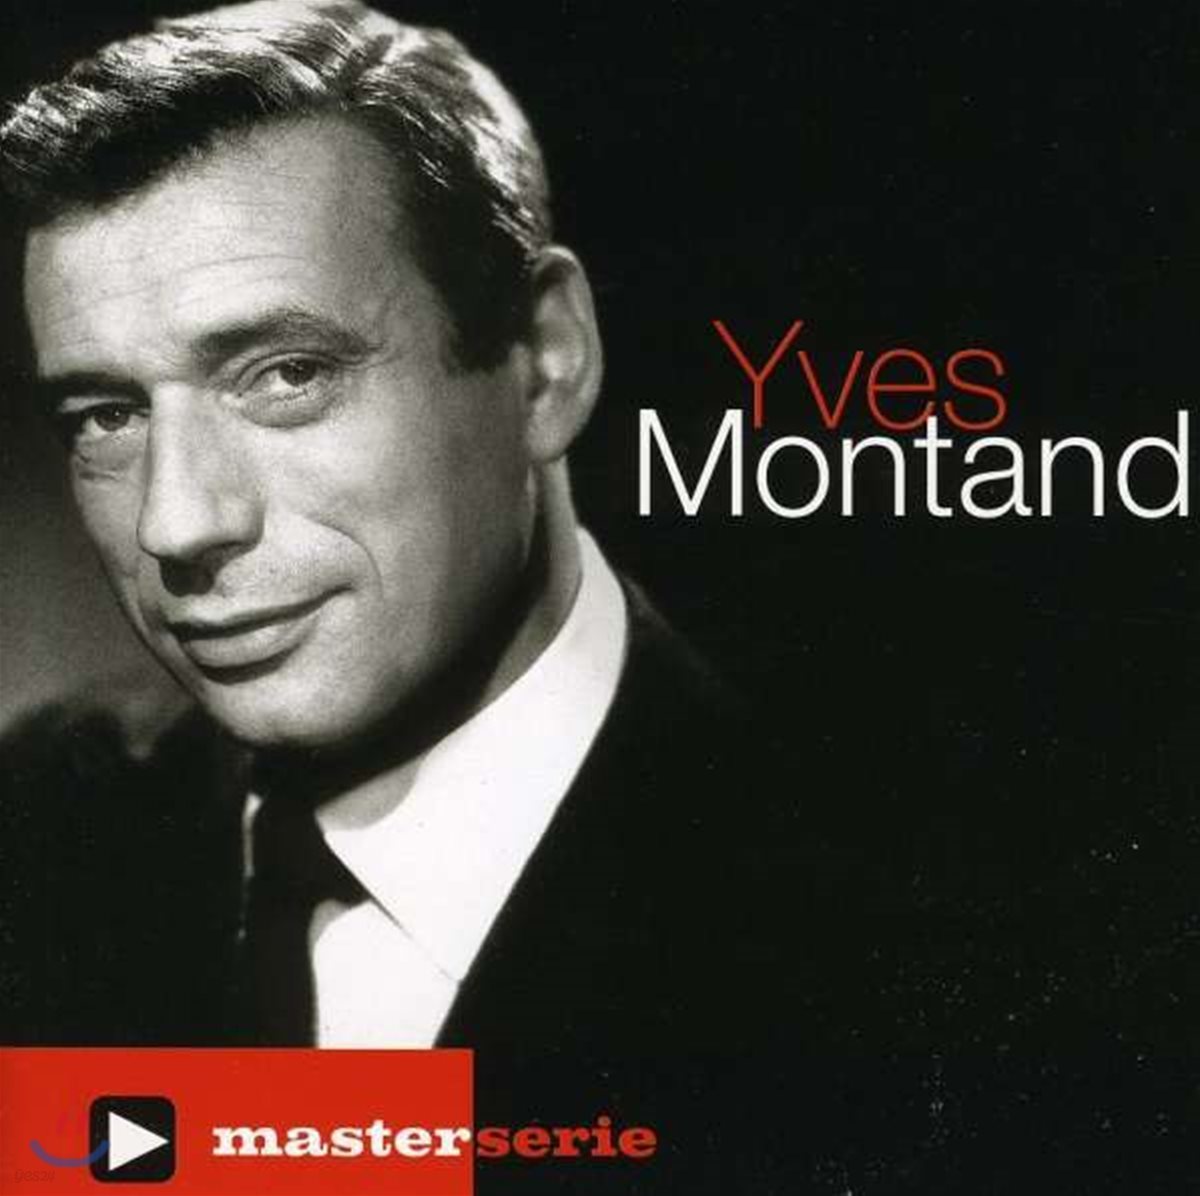 Yves Montand (이브 몽땅) - Master Serie